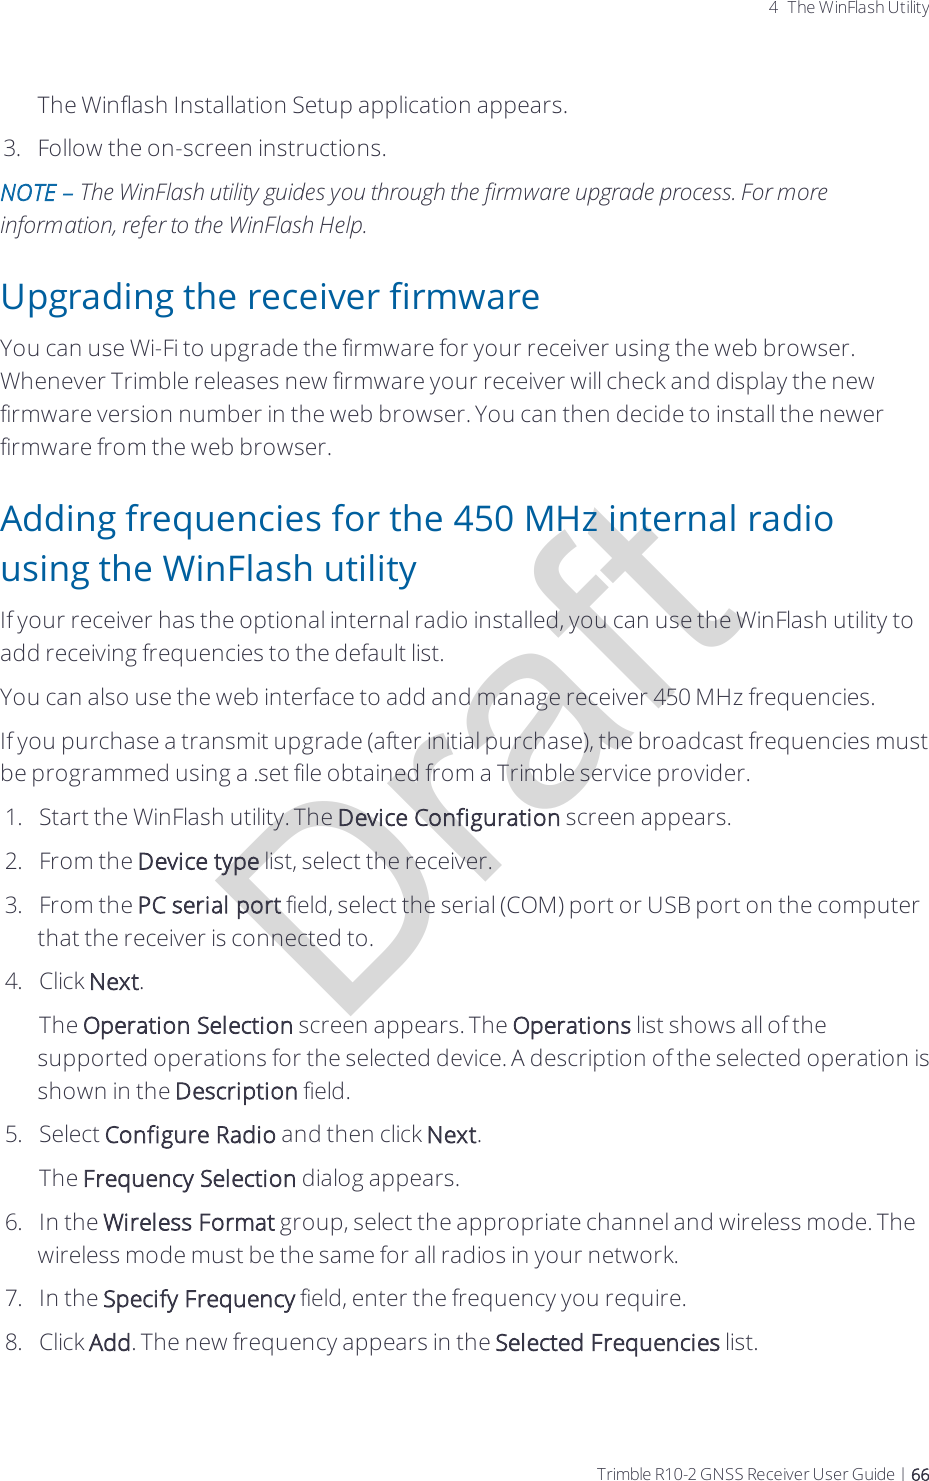 Draft4 The WinFlash UtilityThe Winflash Installation Setup application appears.3.  Follow the on-screen instructions.NOTE – The WinFlash utility guides you through the firmware upgrade process. For more information, refer to the WinFlash Help.Upgrading the receiver firmwareYou can use Wi-Fi to upgrade the firmware for your receiver using the web browser. Whenever Trimble releases new firmware your receiver will check and display the new firmware version number in the web browser. You can then decide to install the newer firmware from the web browser.Adding frequencies for the 450 MHz internal radio using the WinFlash utilityIf your receiver has the optional internal radio installed, you can use the WinFlash utility to add receiving frequencies to the default list. You can also use the web interface to add and manage receiver 450 MHz frequencies.If you purchase a transmit upgrade (after initial purchase), the broadcast frequencies must be programmed using a .set file obtained from a Trimble service provider.1.  Start the WinFlash utility. The Device Configuration screen appears.2.  From the Device type list, select the receiver.3.  From the PC serial port field, select the serial (COM) port or USB port on the computer that the receiver is connected to.4.  Click Next. The Operation Selection screen appears. The Operations list shows all of the supported operations for the selected device. A description of the selected operation is shown in the Description field.5.  Select Configure Radio and then click Next.The Frequency Selection dialog appears. 6.  In the Wireless Format group, select the appropriate channel and wireless mode. The wireless mode must be the same for all radios in your network. 7.  In the Specify Frequency field, enter the frequency you require.8.  Click Add. The new frequency appears in the Selected Frequencies list. Trimble R10-2 GNSS Receiver User Guide | 66